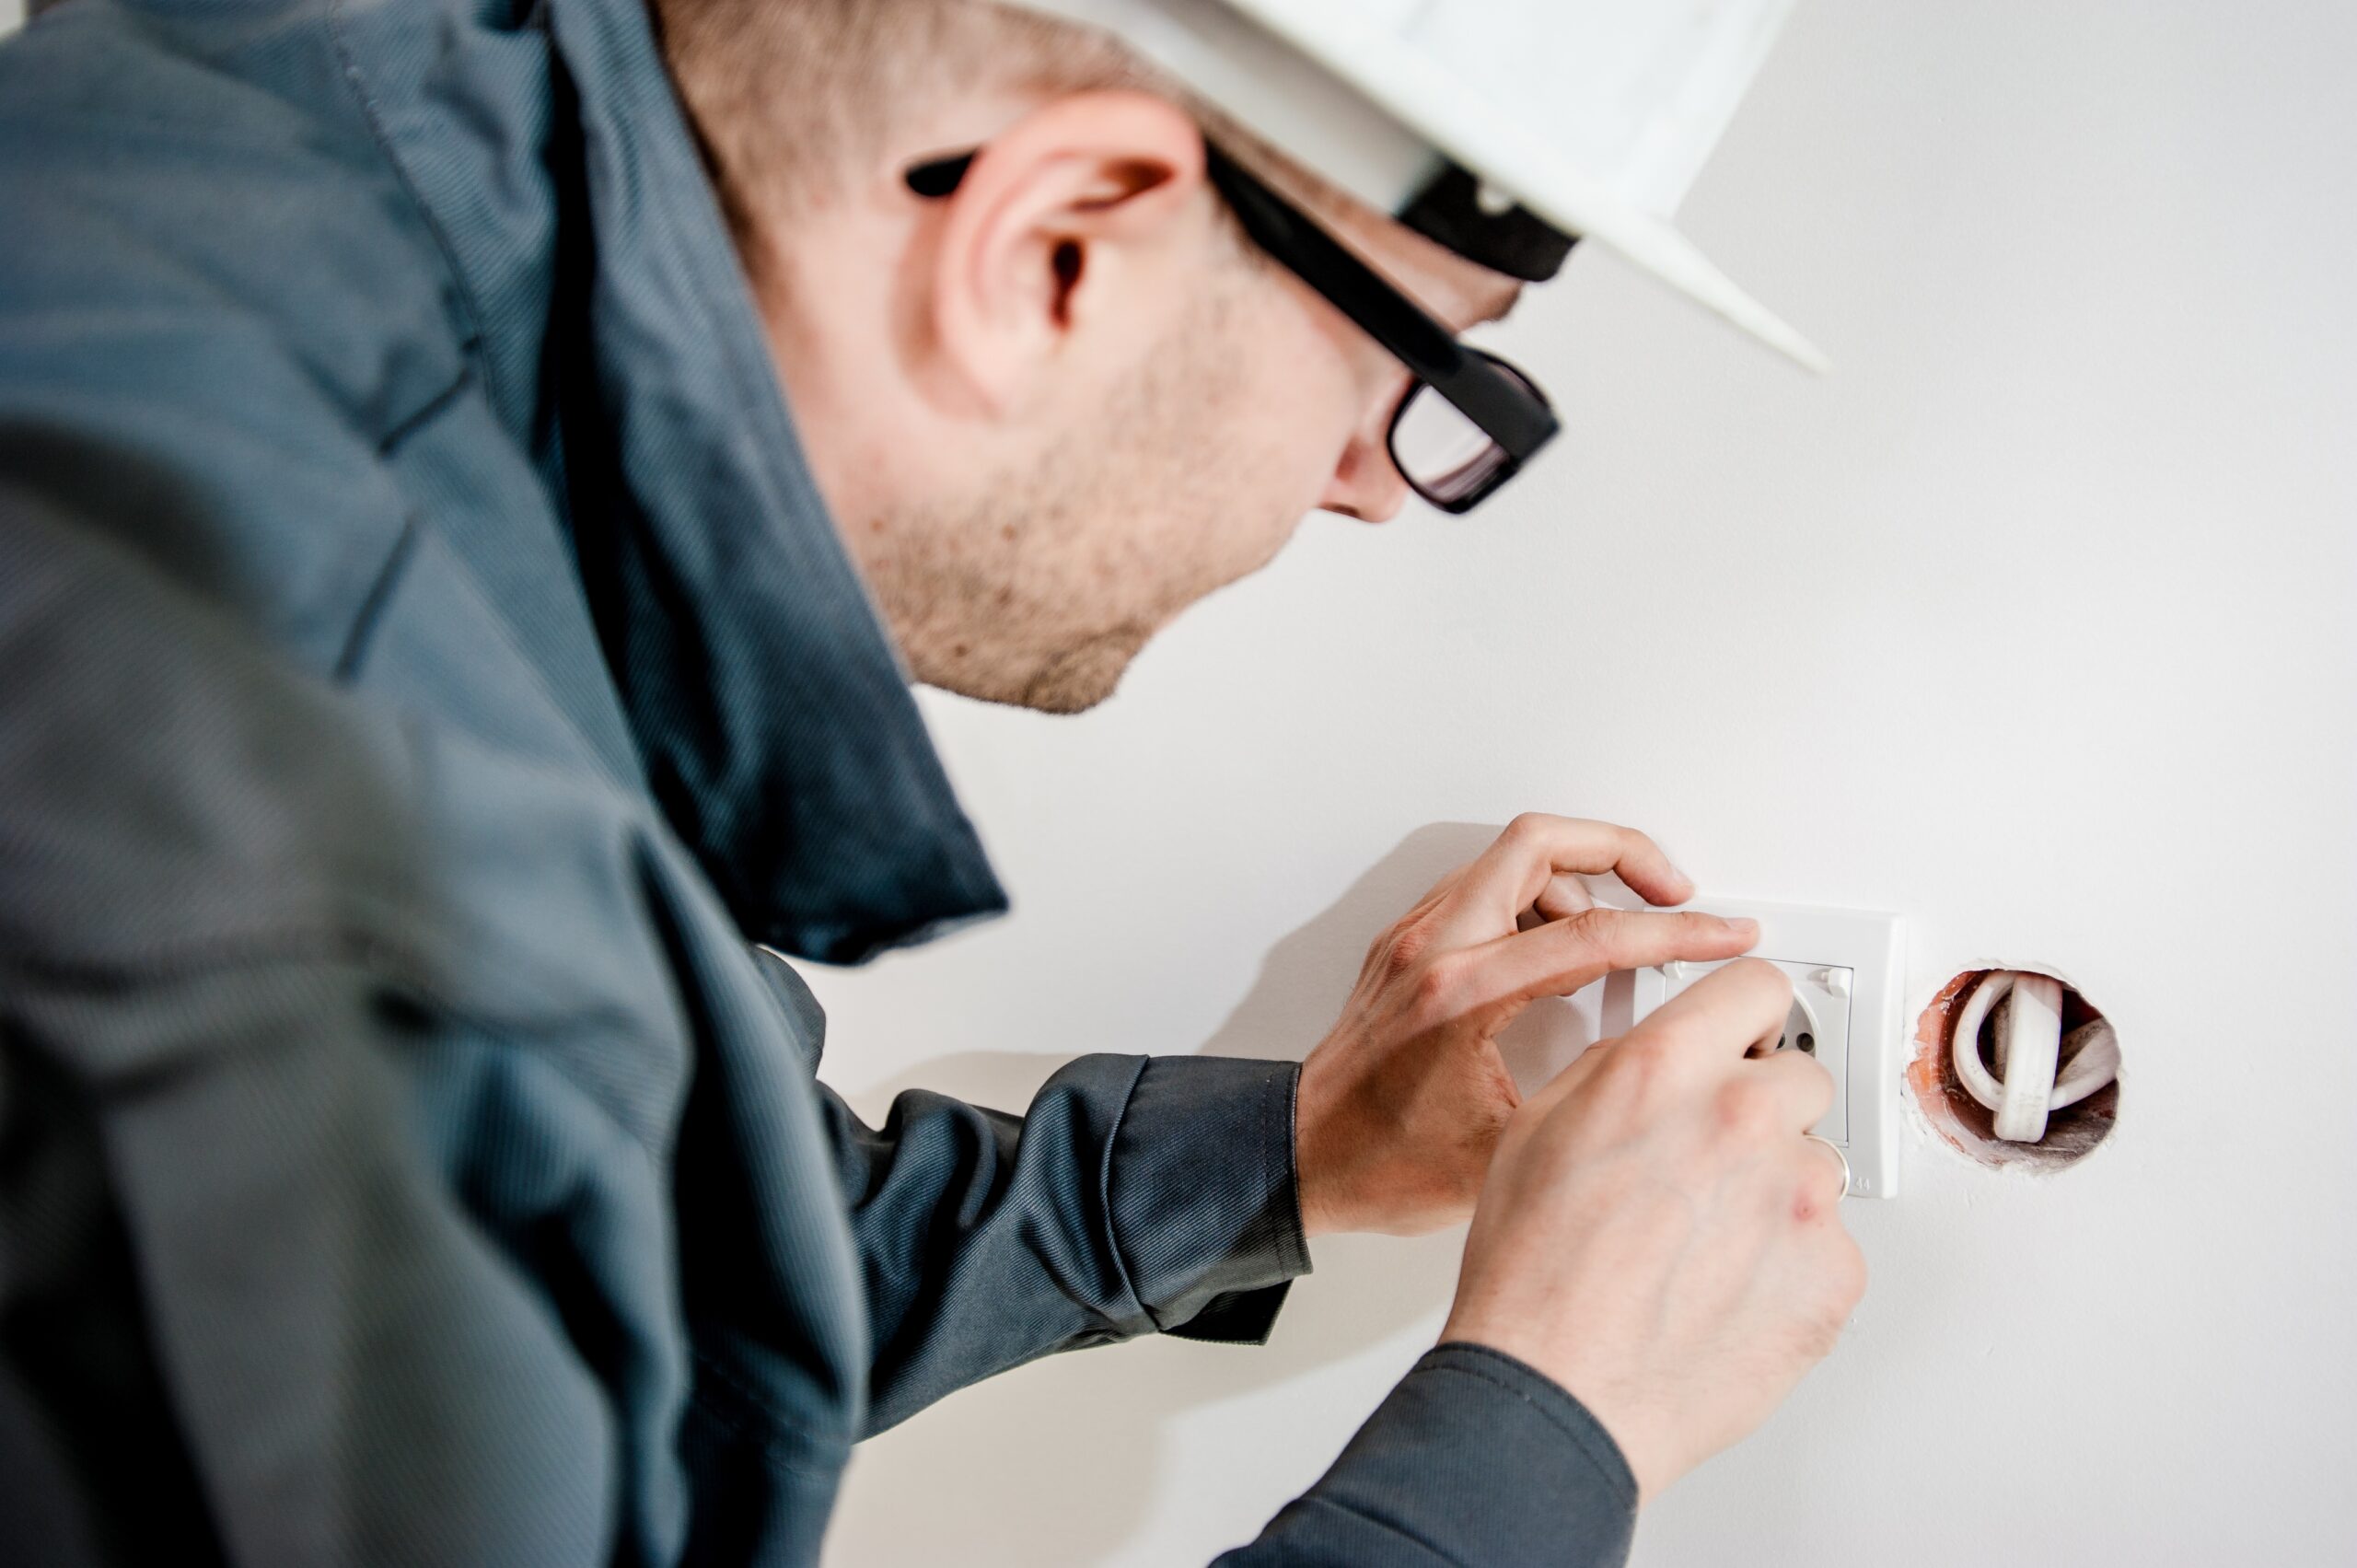 Licensed electrical contractor